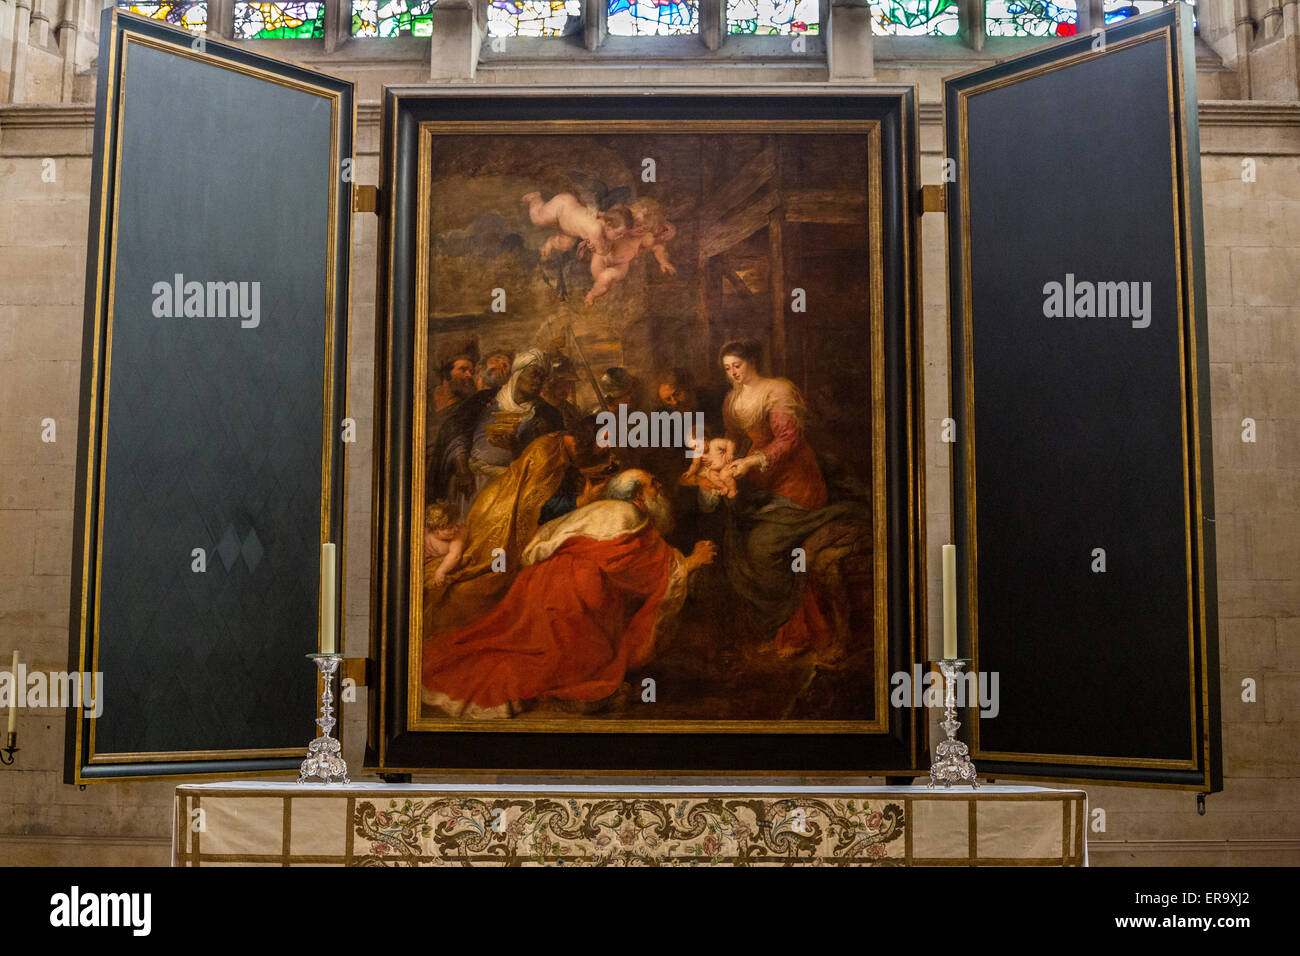 UK, England, Cambridge.  King's College Chapel,  The Adoration of the Magi, by Peter Paul Rubens, 1634. Stock Photo